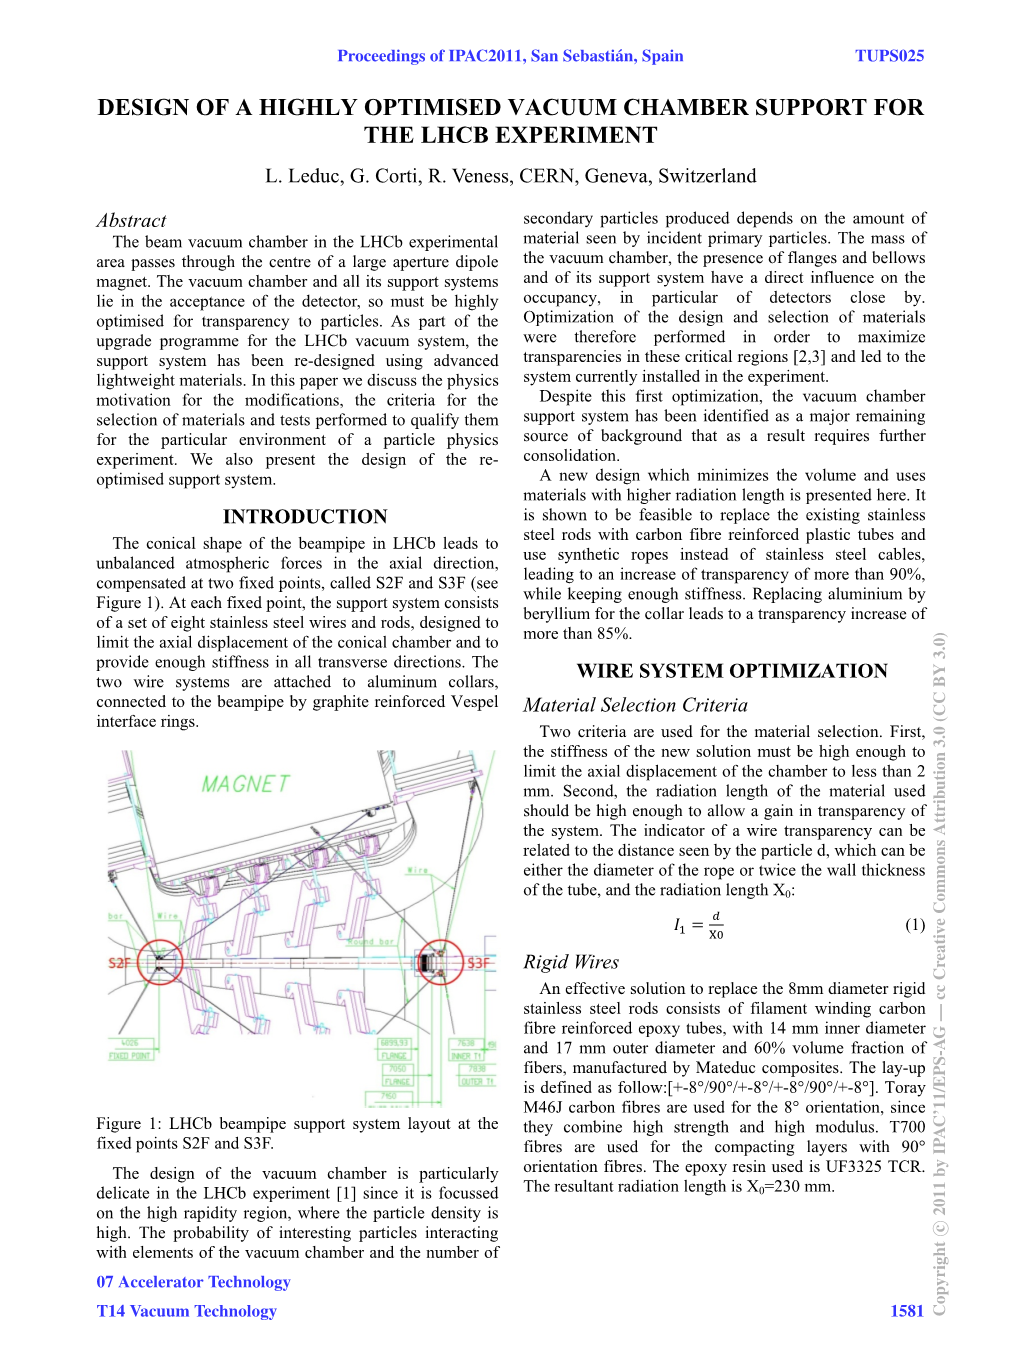 Design of a Highly Optimised Vacuum Chamber Support for the Lhcb Experiment L